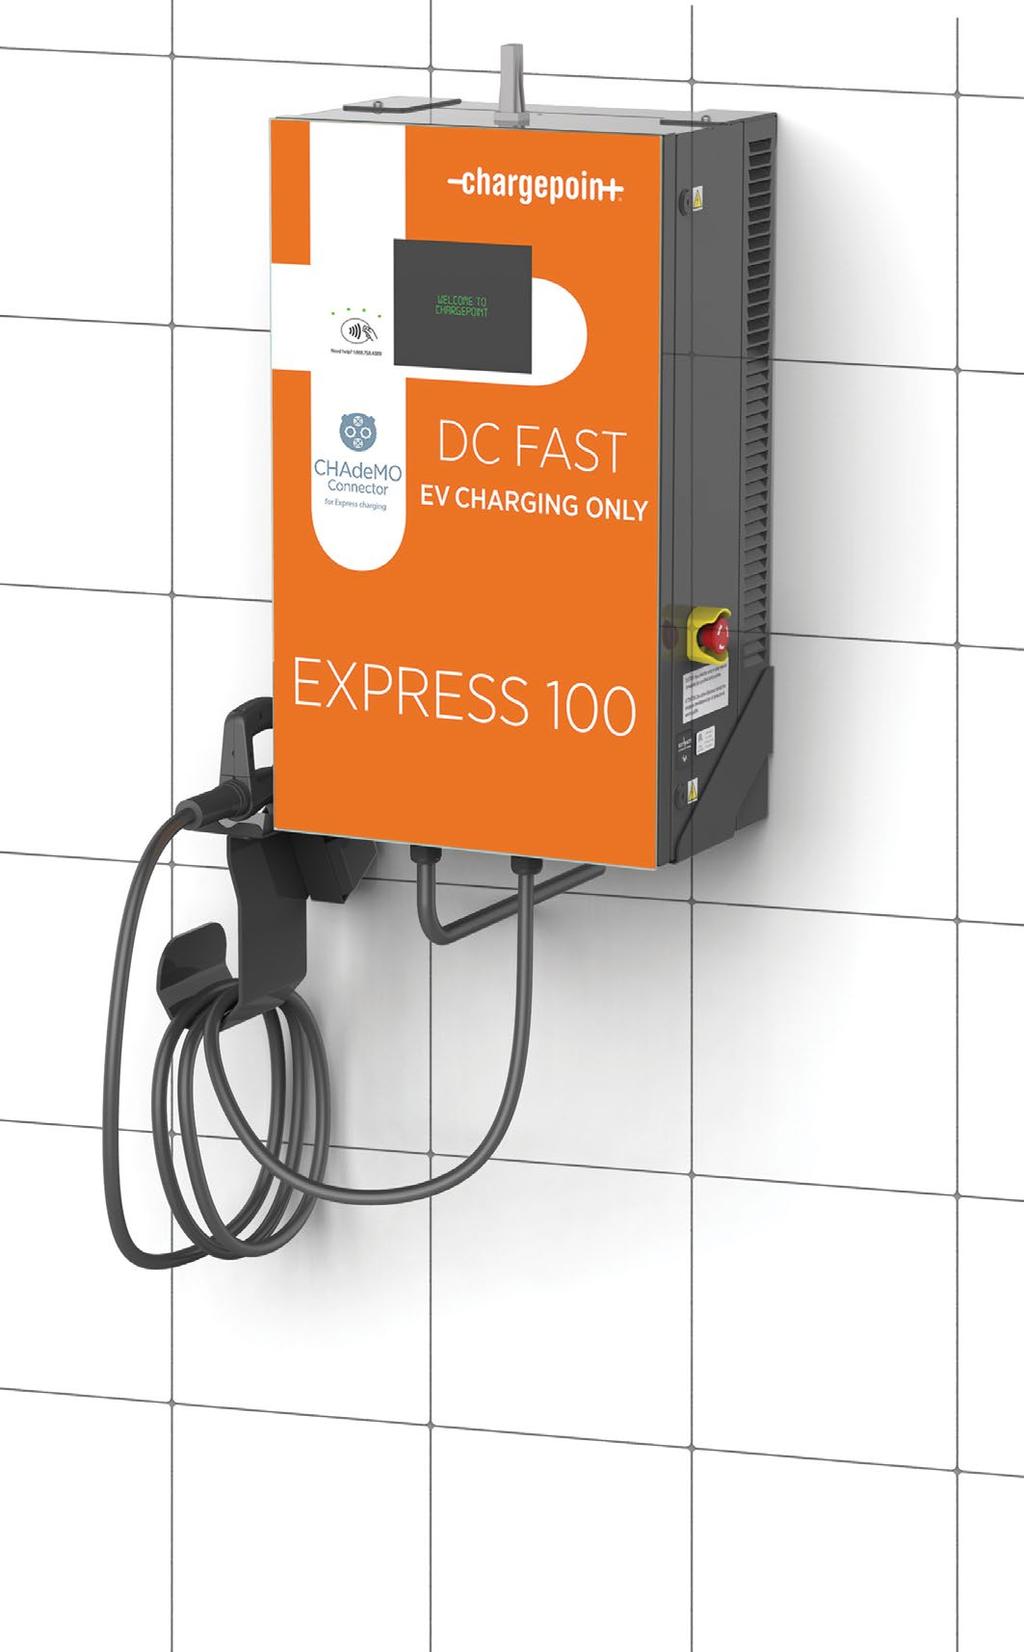 Express 100 with CHAdeMO